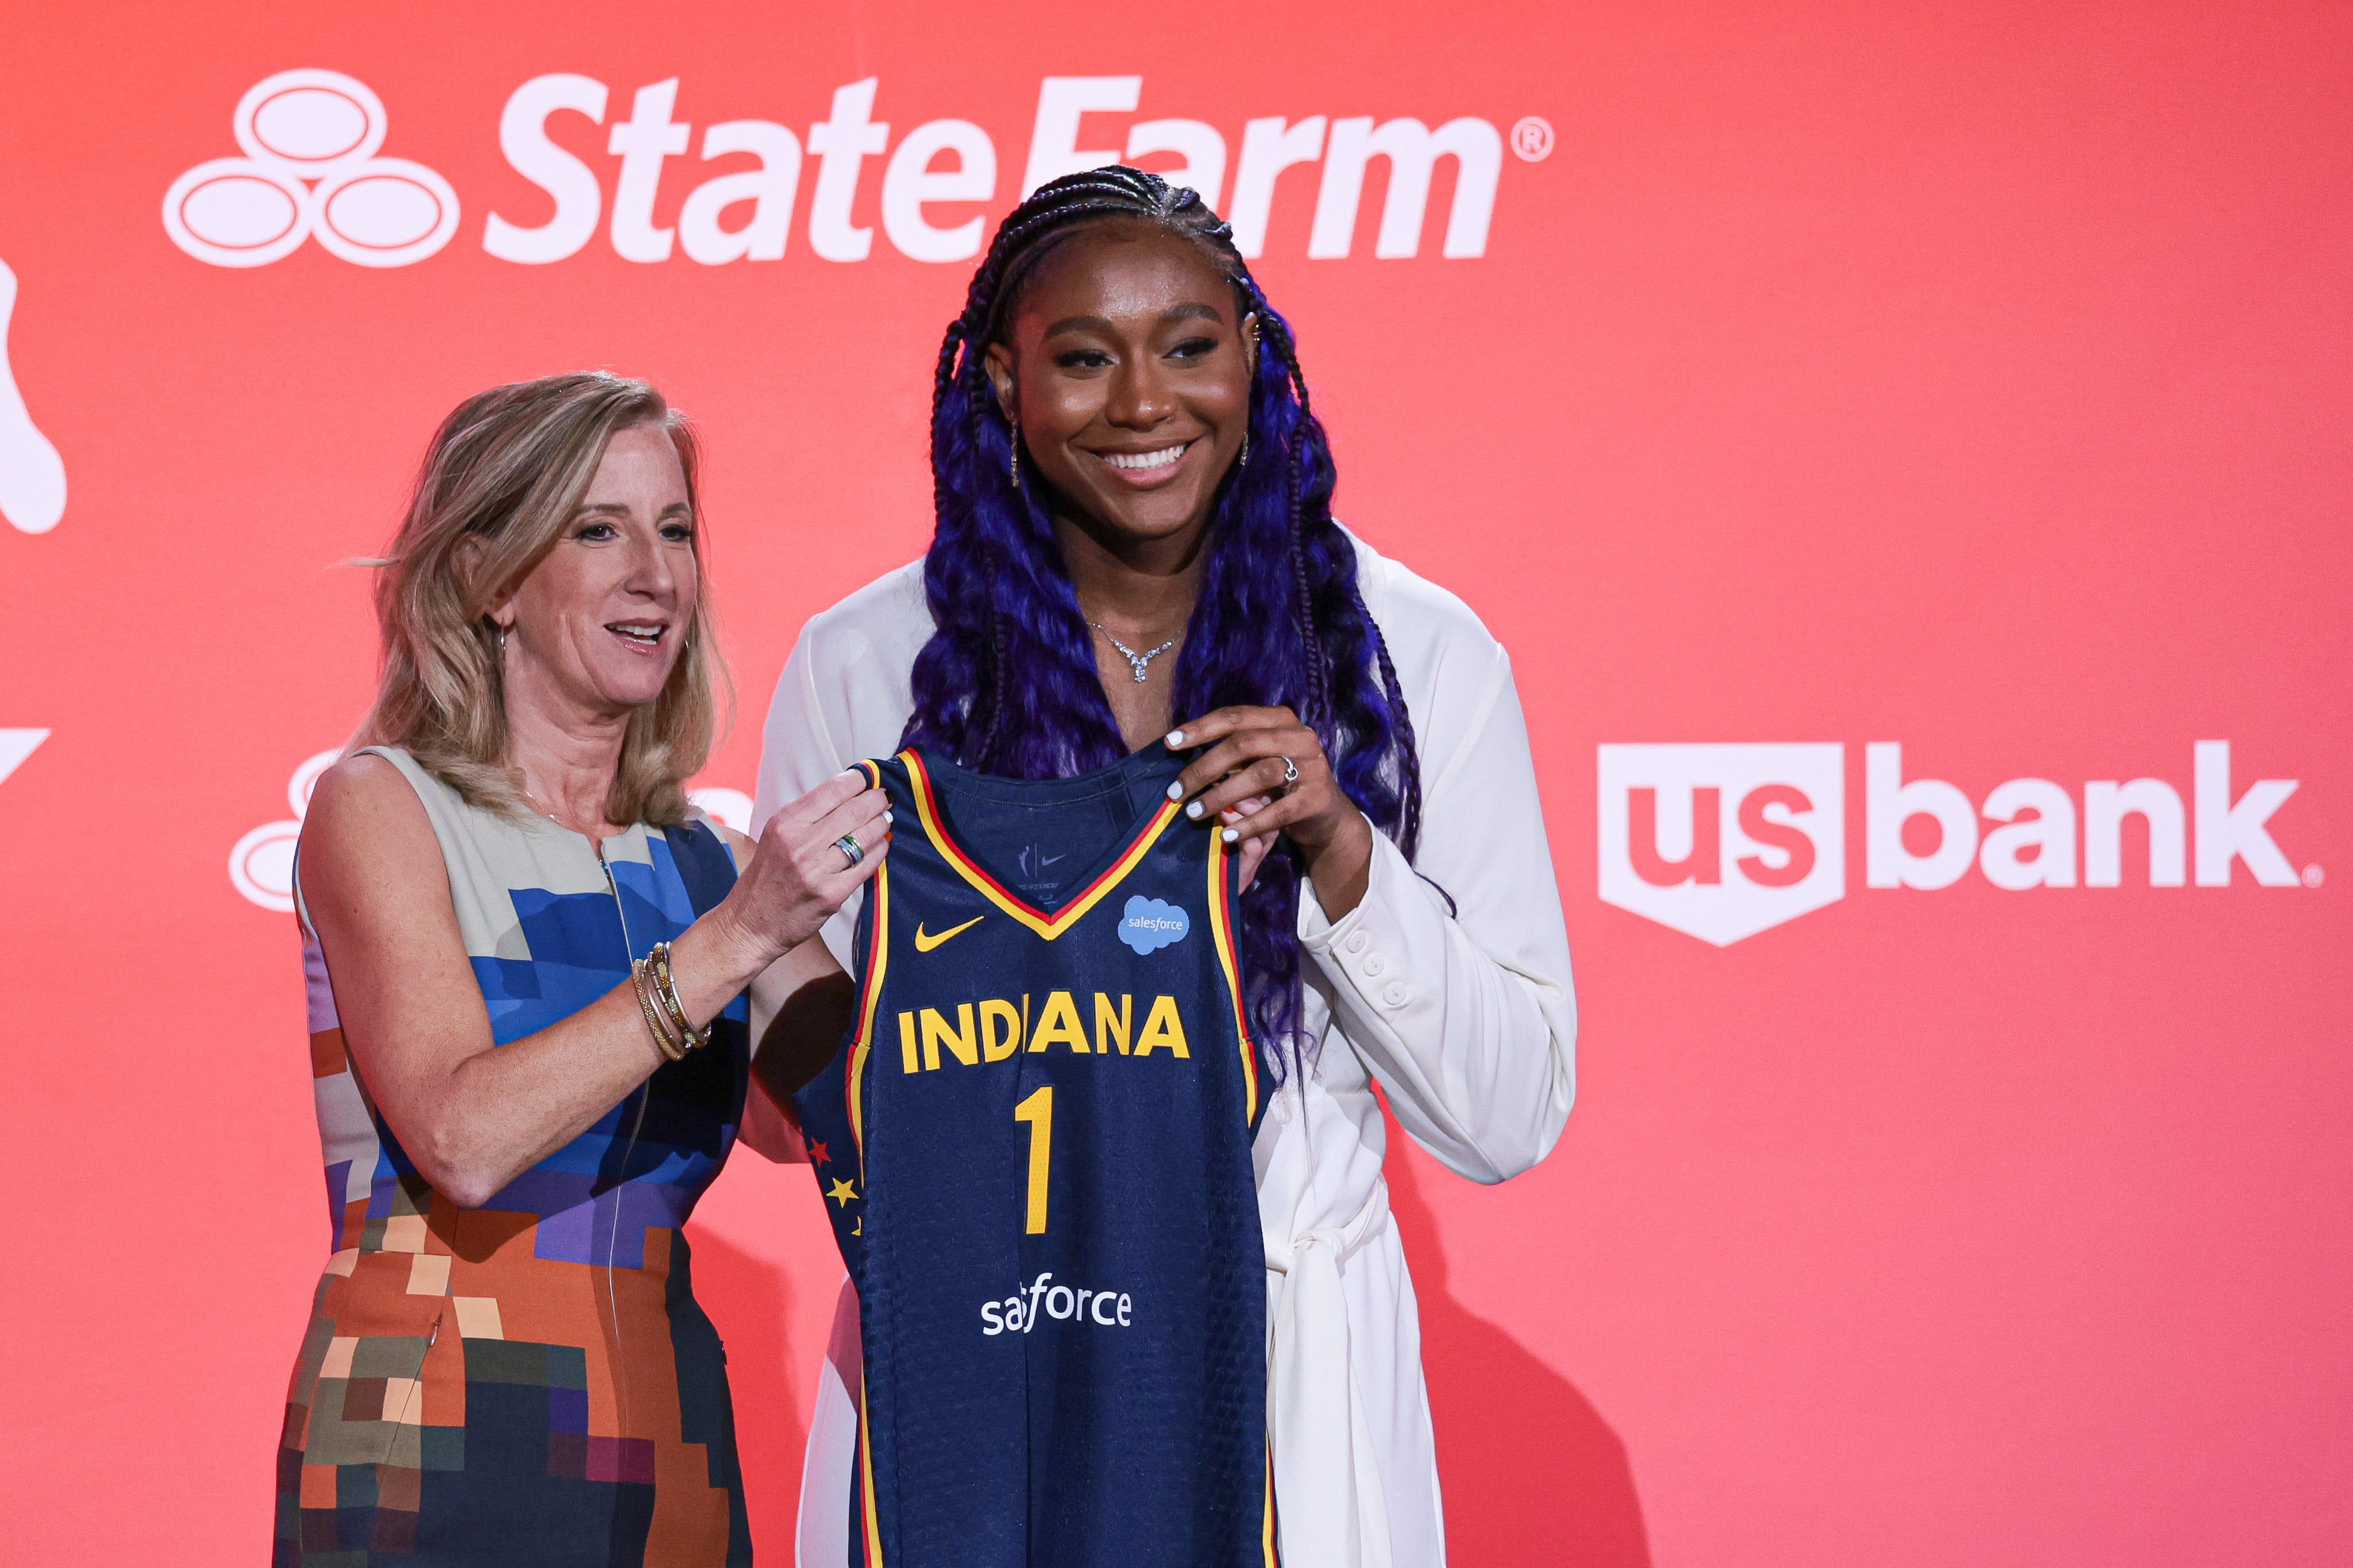 indiana fever picks first in star-studded wnba draft with caitlin clark. see full draft order